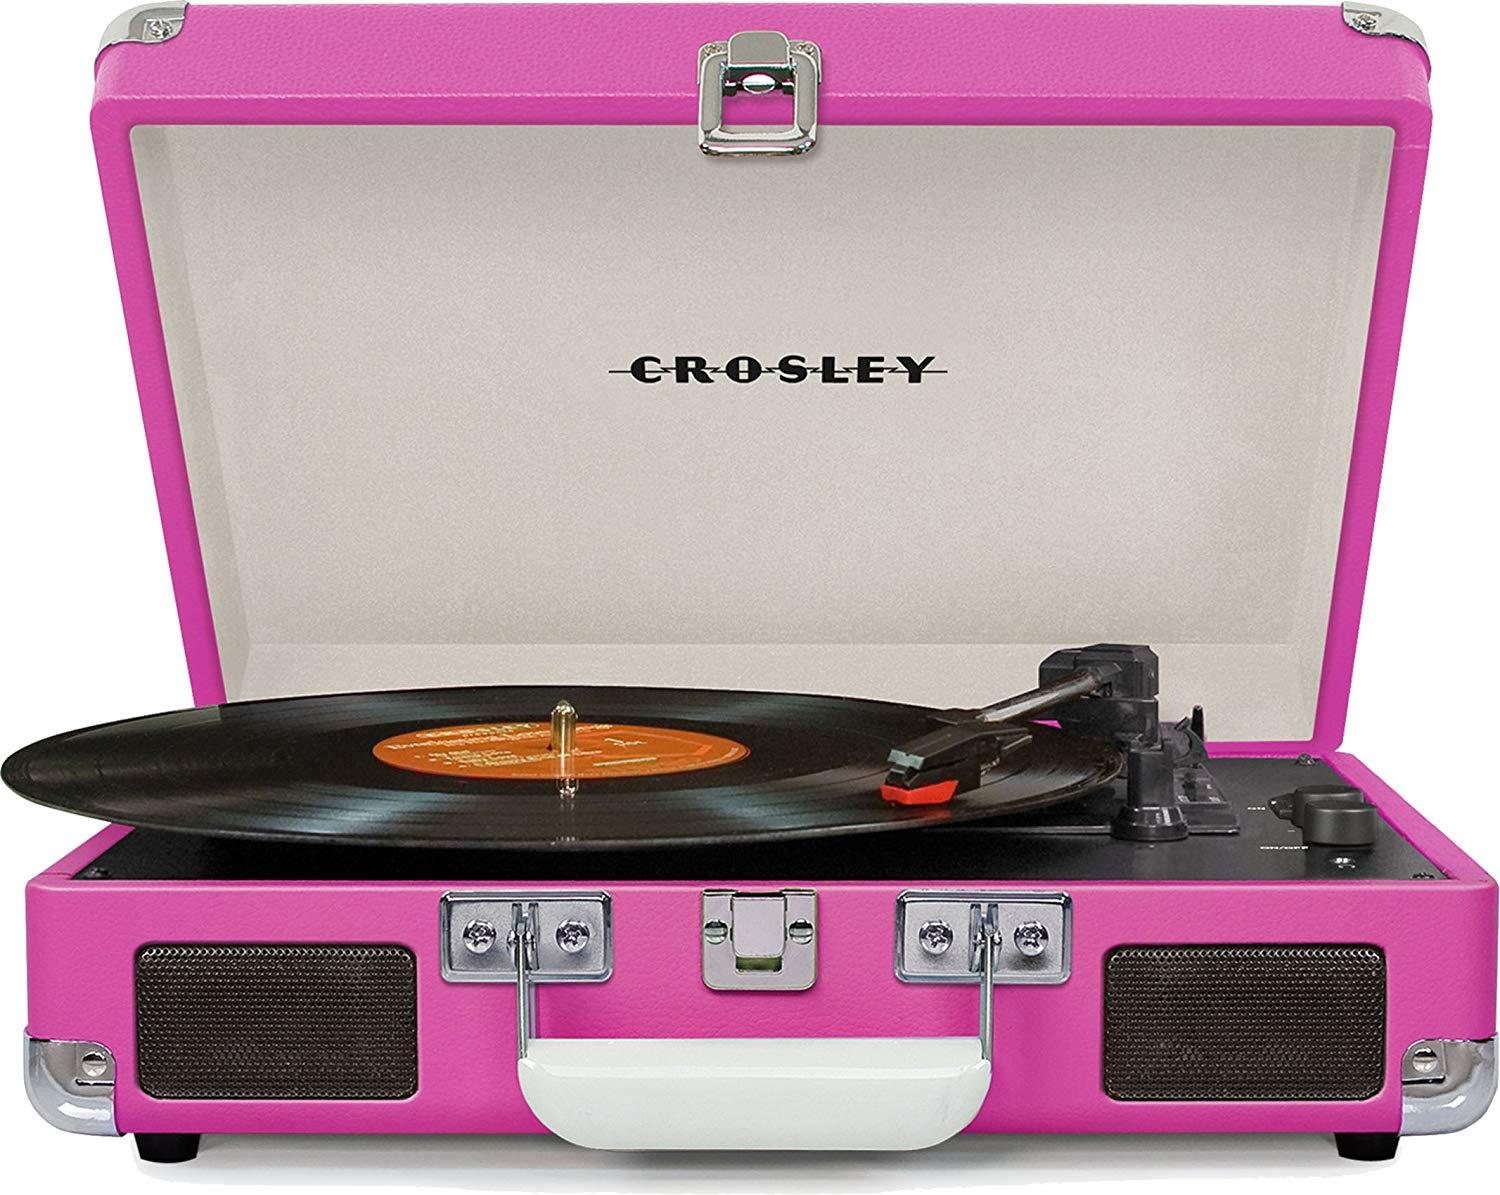 PORTABLE STEREO RECORD PLAYER HOT PINK TURNTABLE ELVIS PRESLEY 3 SPEED ...